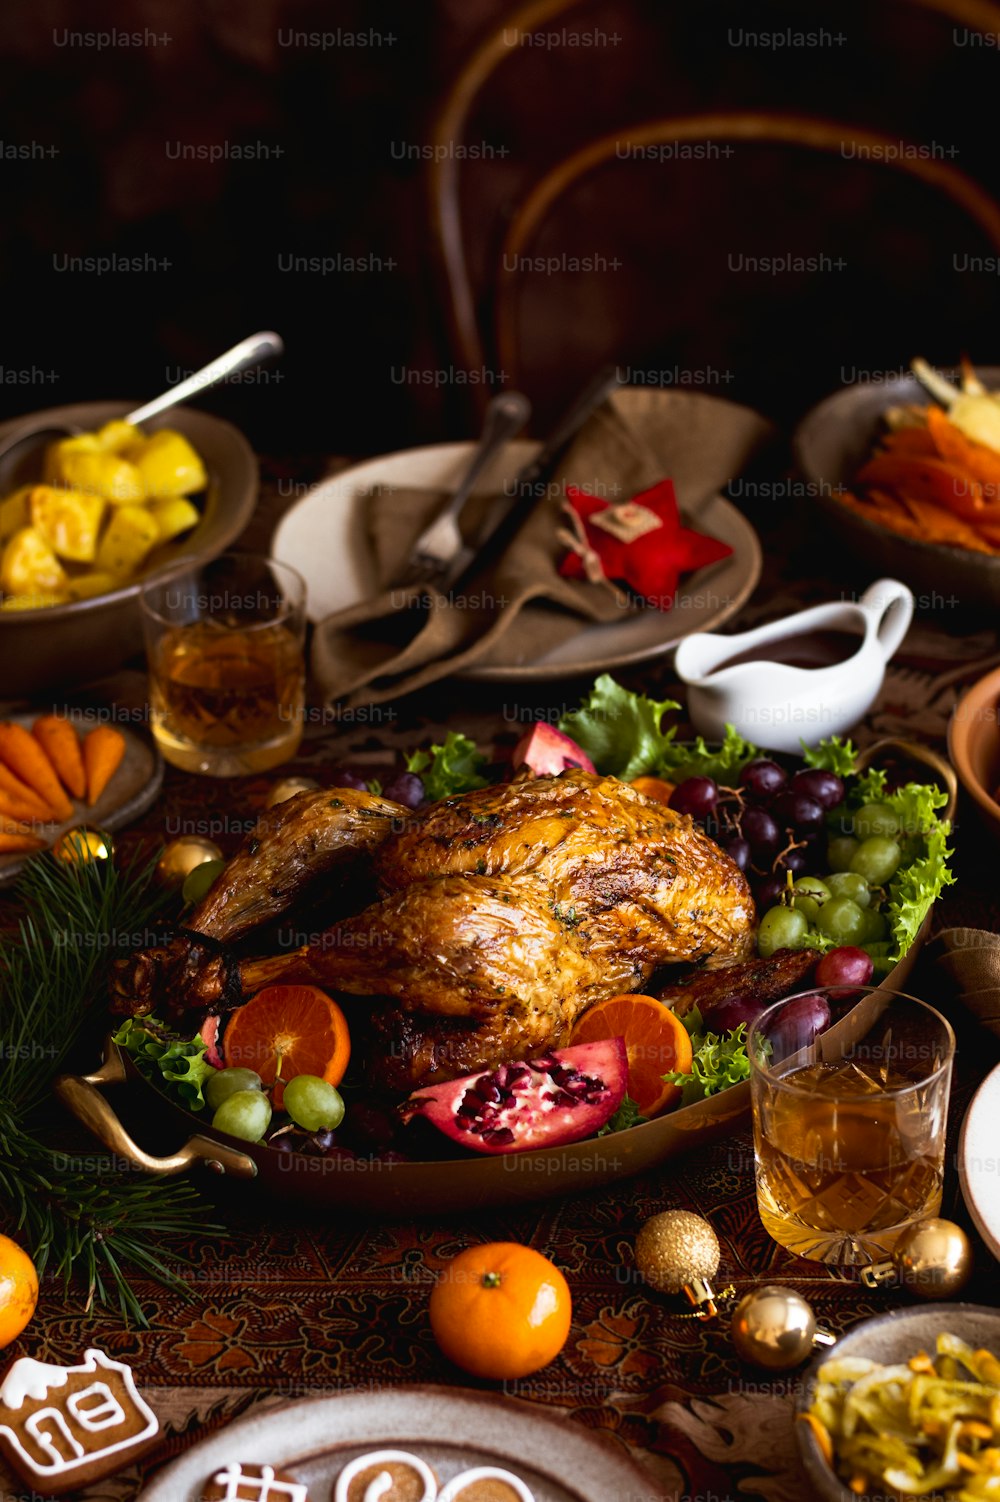 a table with a turkey, oranges, and other foods on it